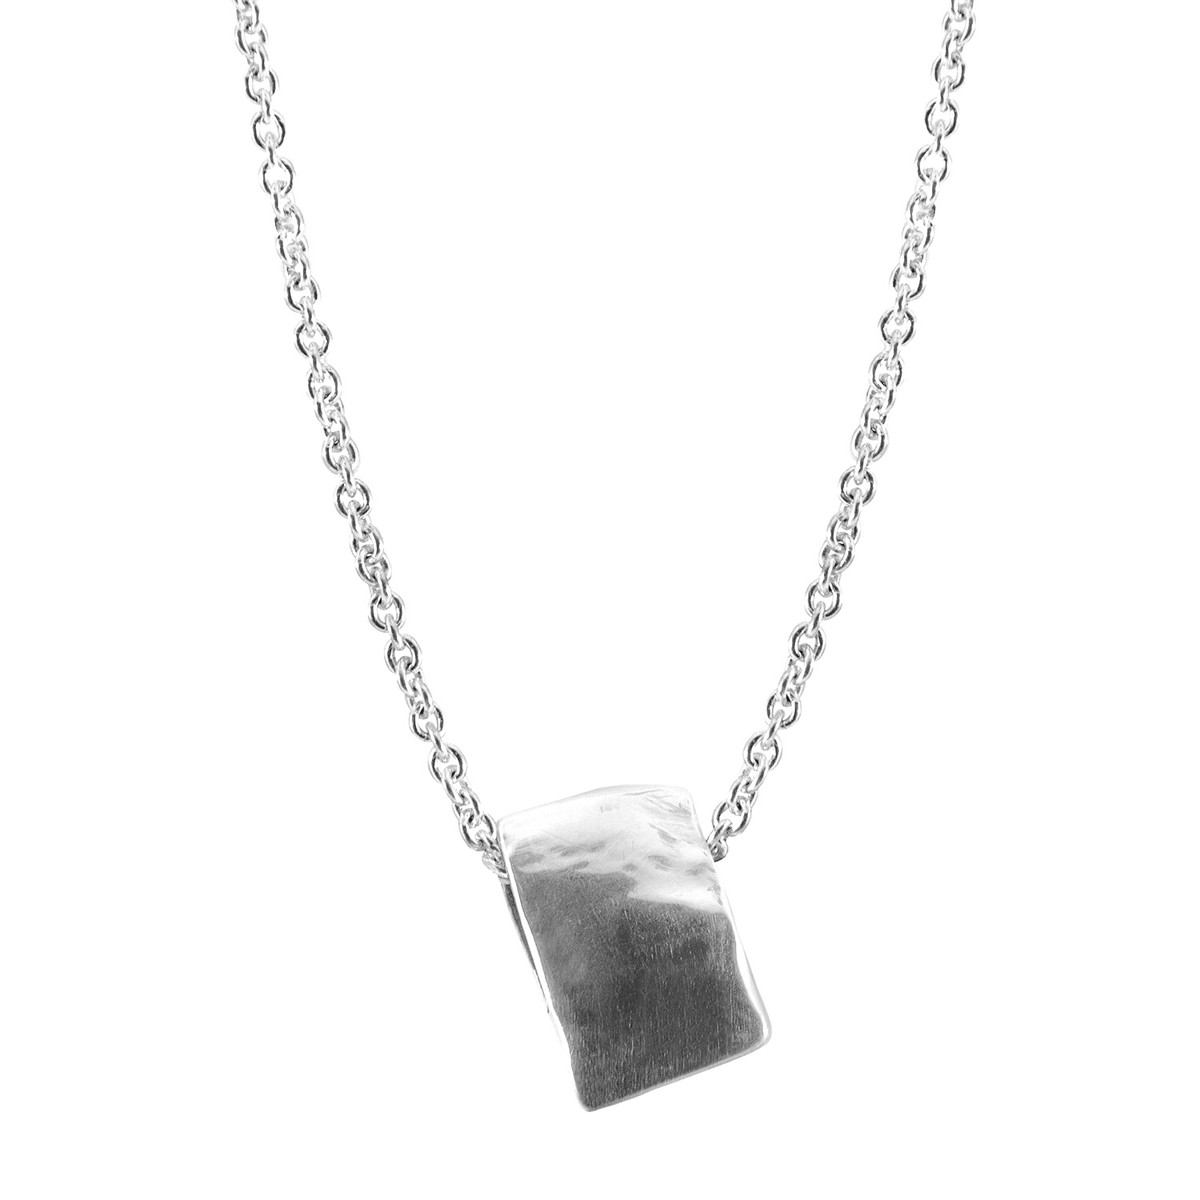 Anchor & Crew GUSTATORY Coffee Bag Silver Necklace Pendant